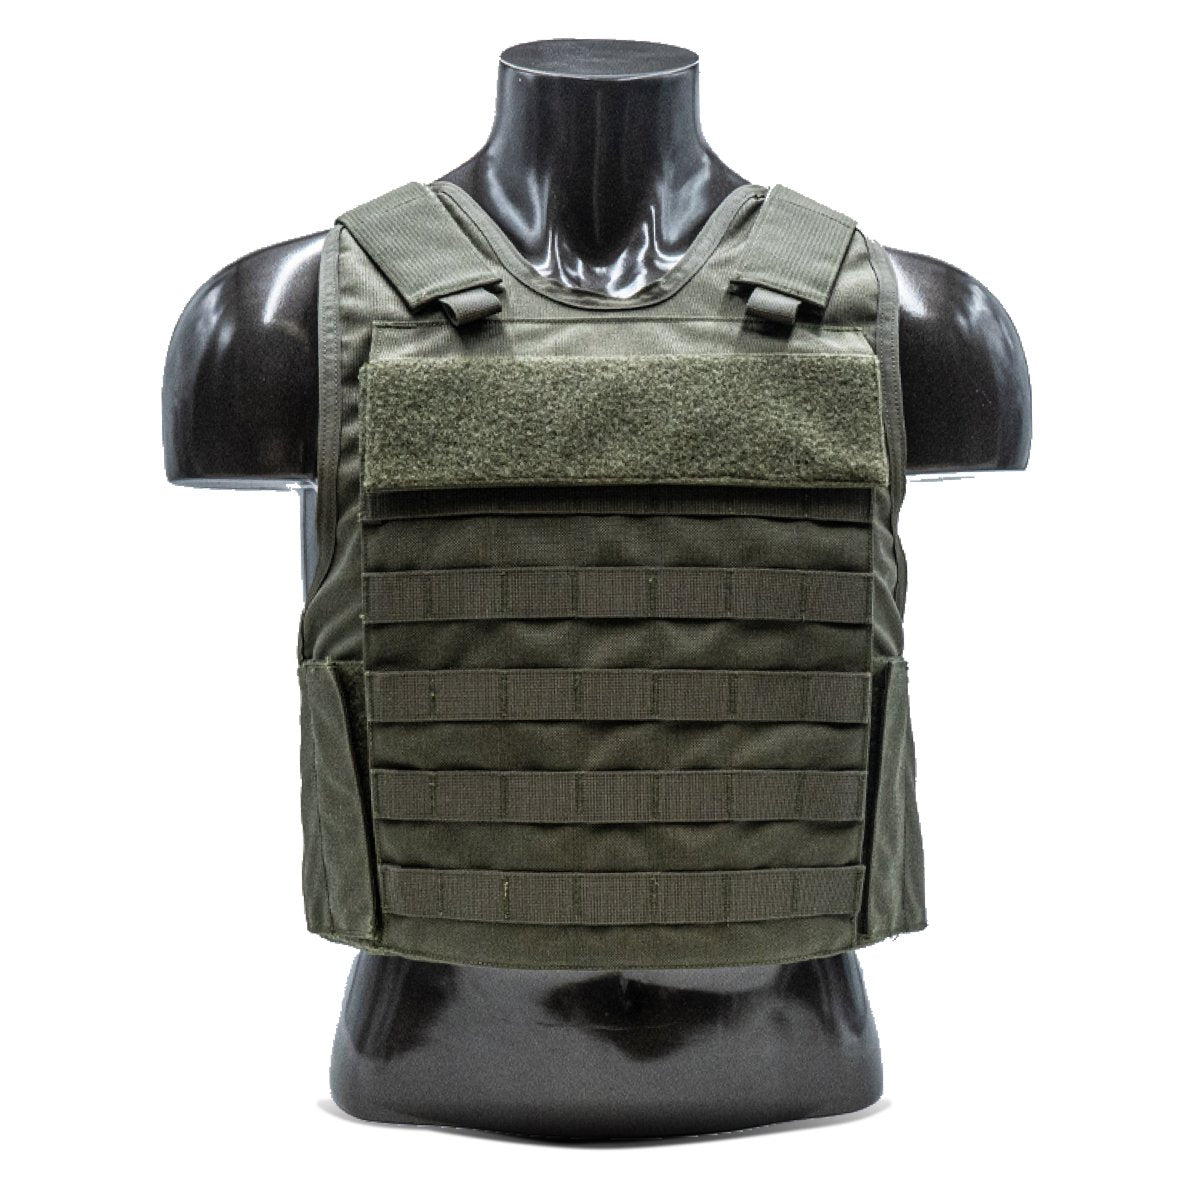 A Body Armor Direct mannequin wearing a Plate Carrier.